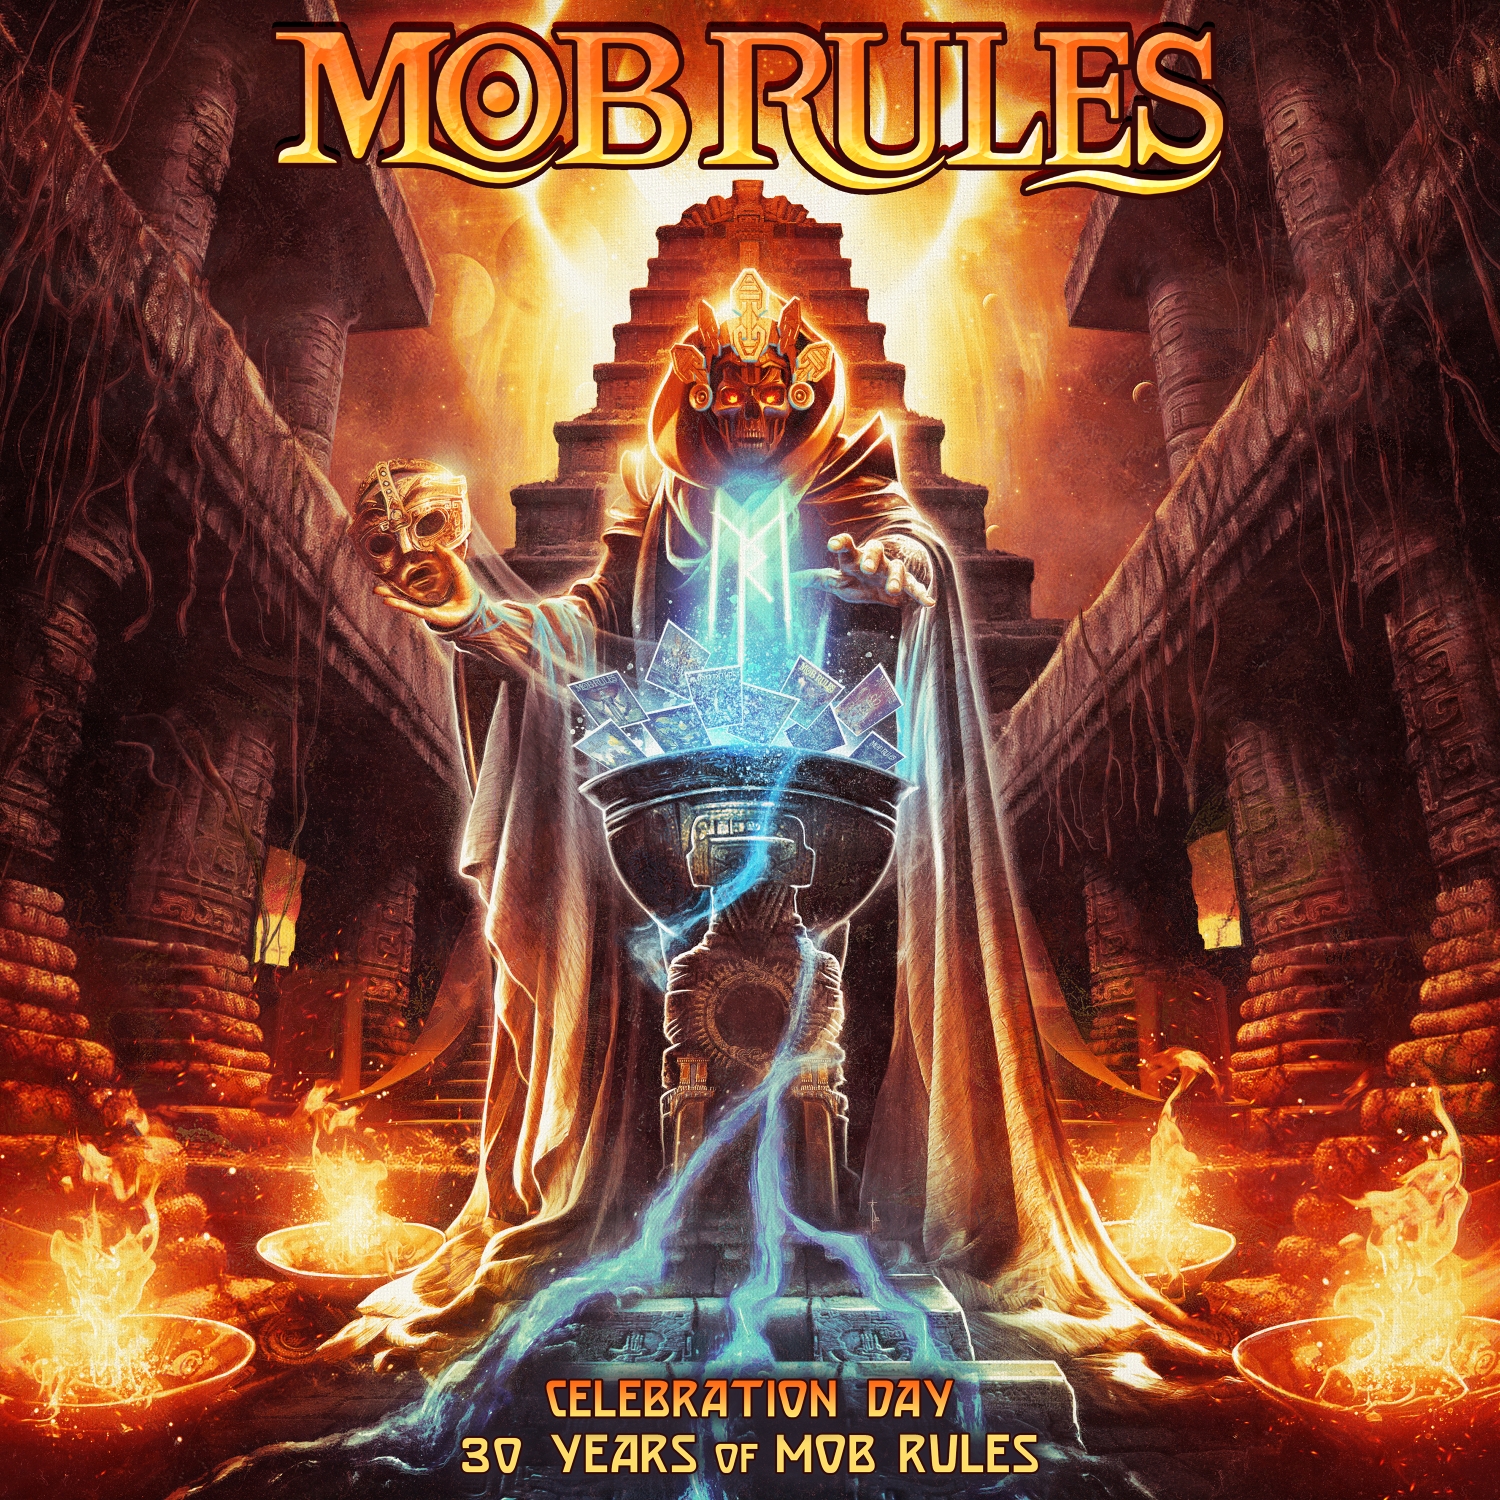 Mob Rules (D) – Celebration Day (30 Years of Mob Rules)